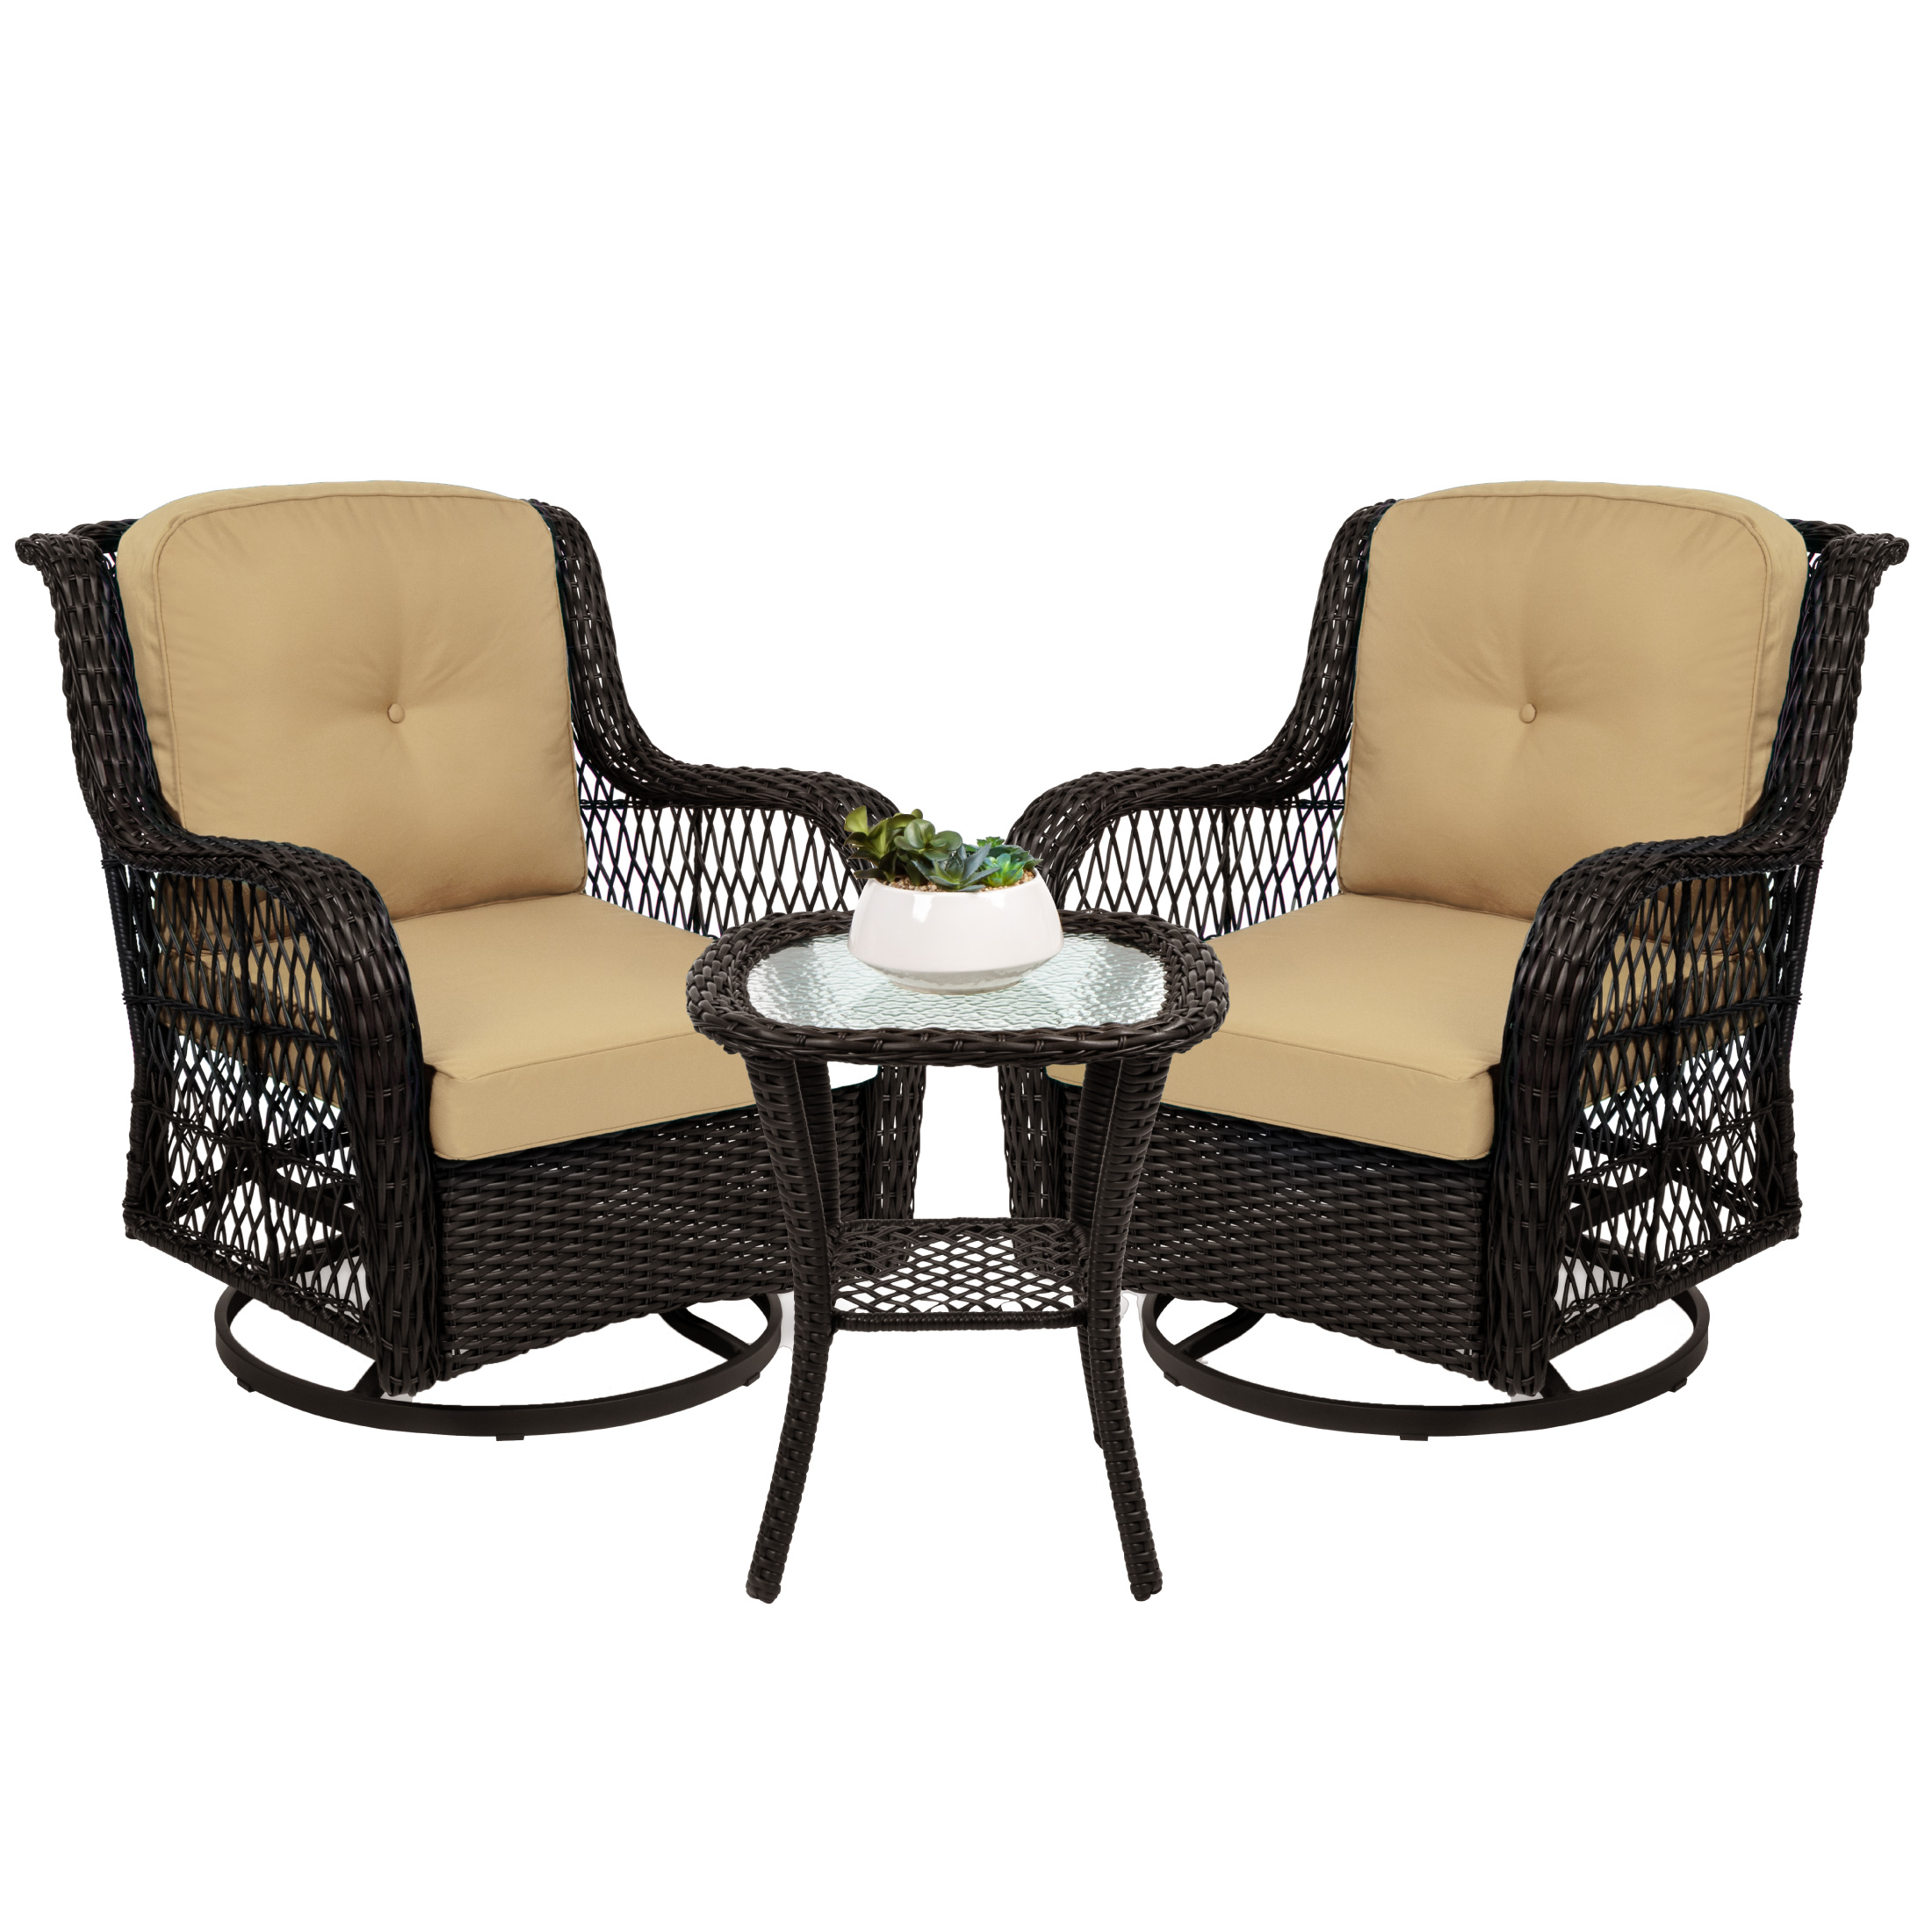 Best Choice Products 3-Piece Patio Wicker Bistro Furniture Set w/ 2 Cushioned Swivel Rocking Chairs, Side Table - Beige - image 1 of 8